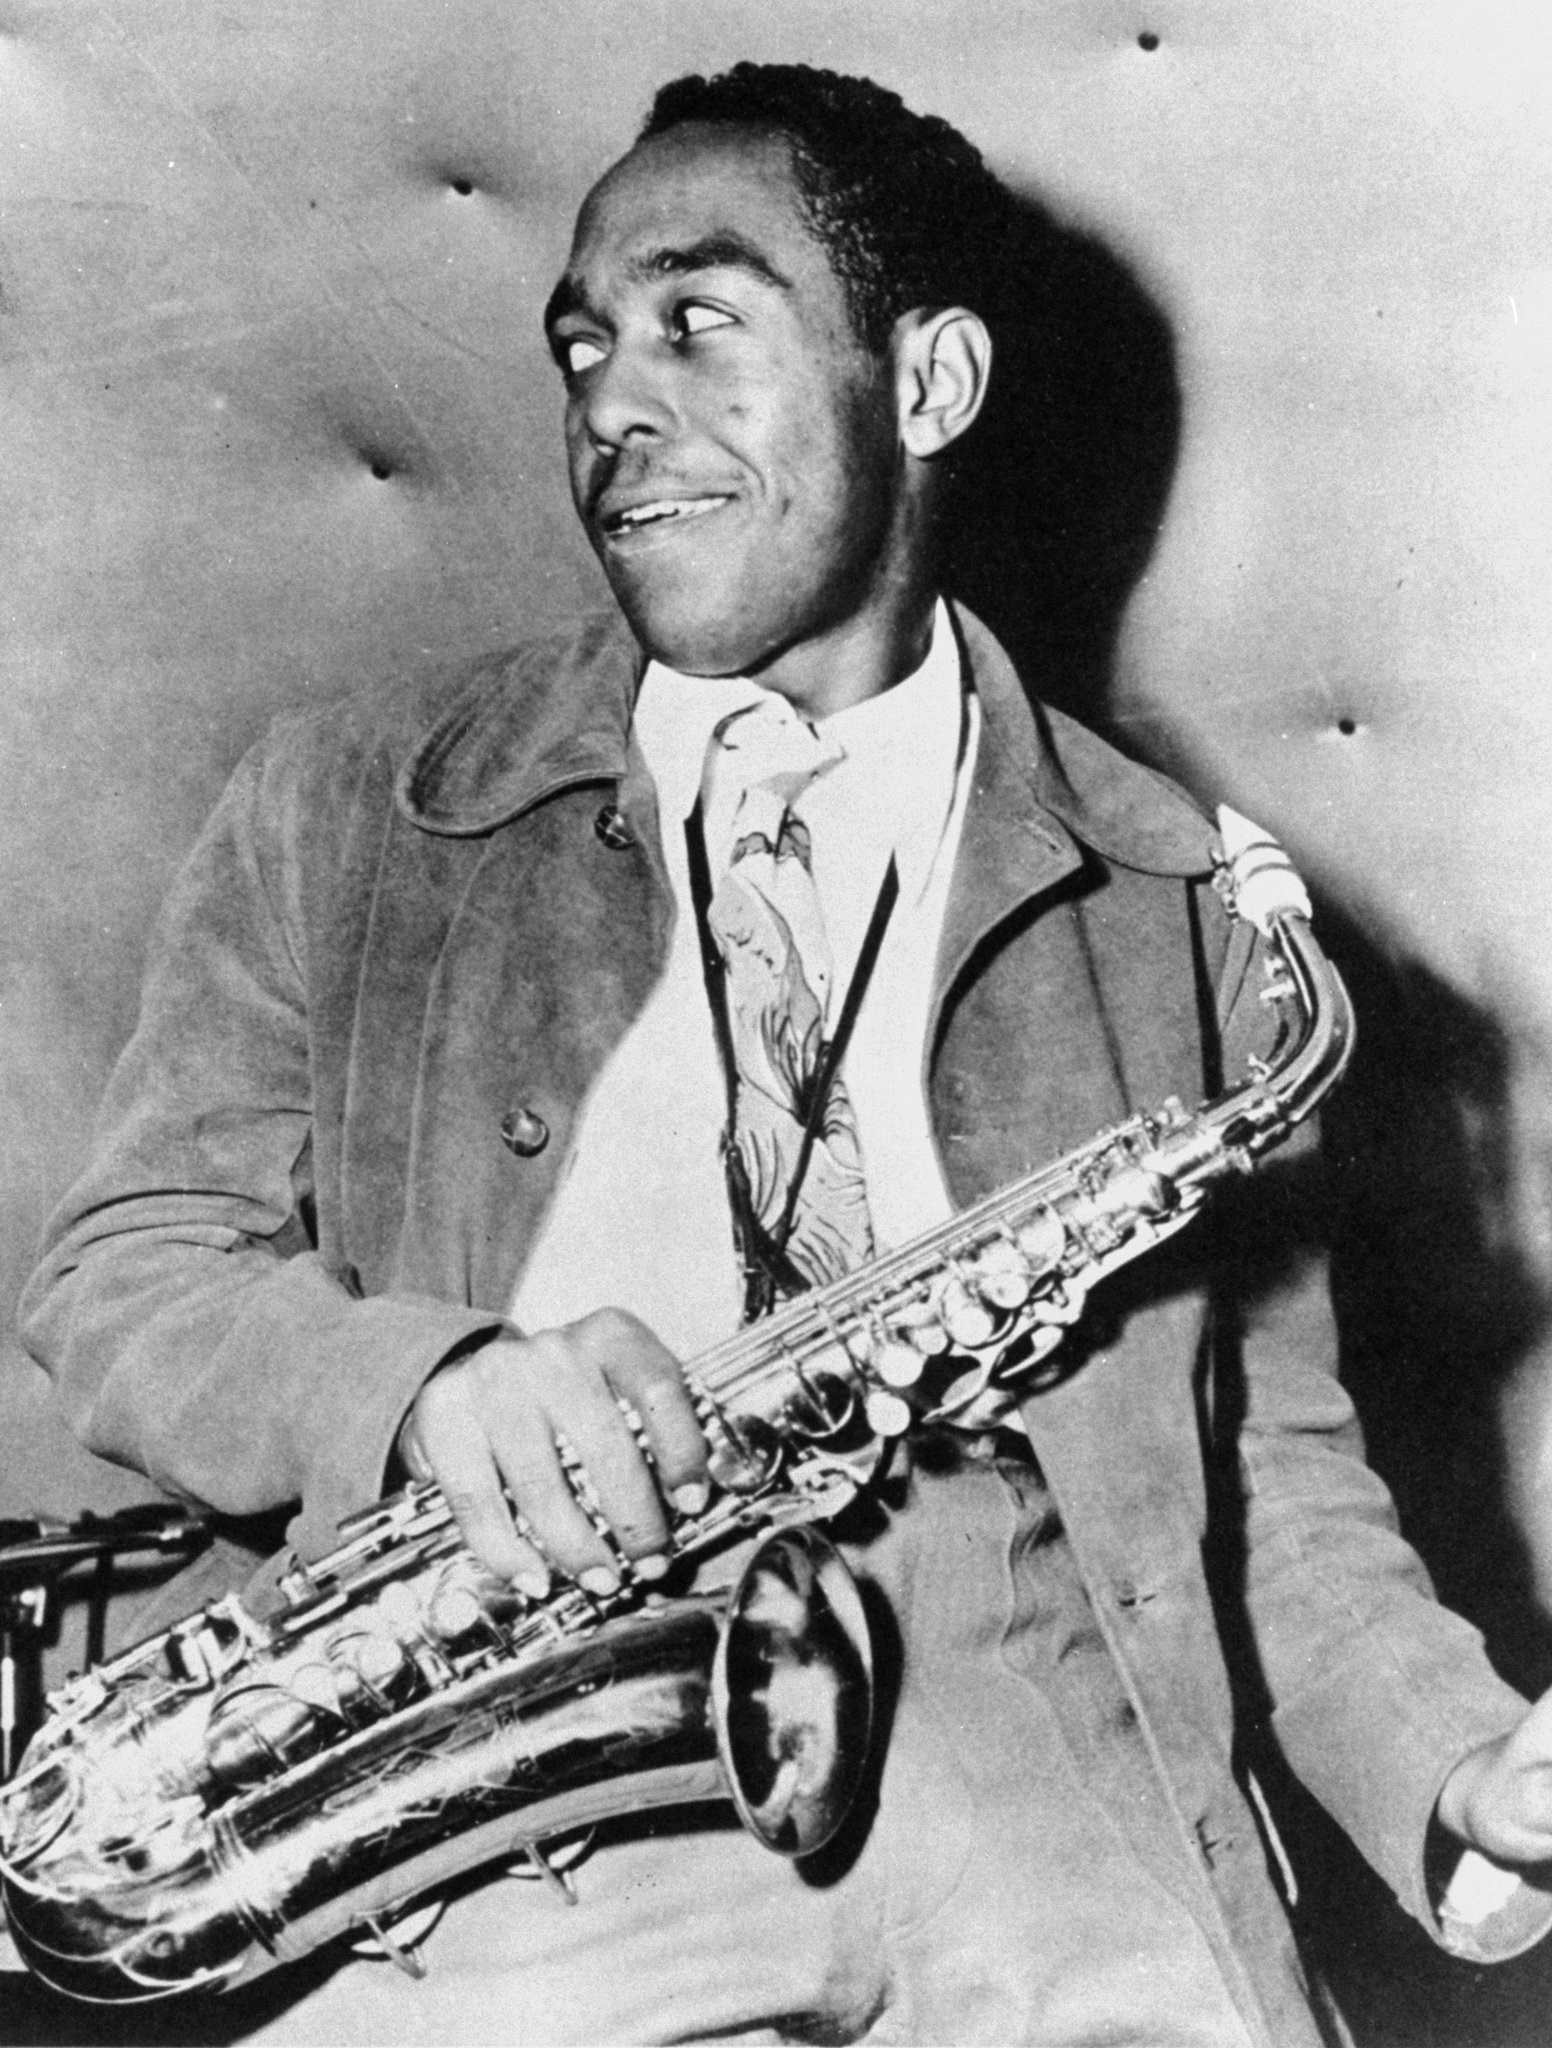 Charlie Parker Known people famous people news and